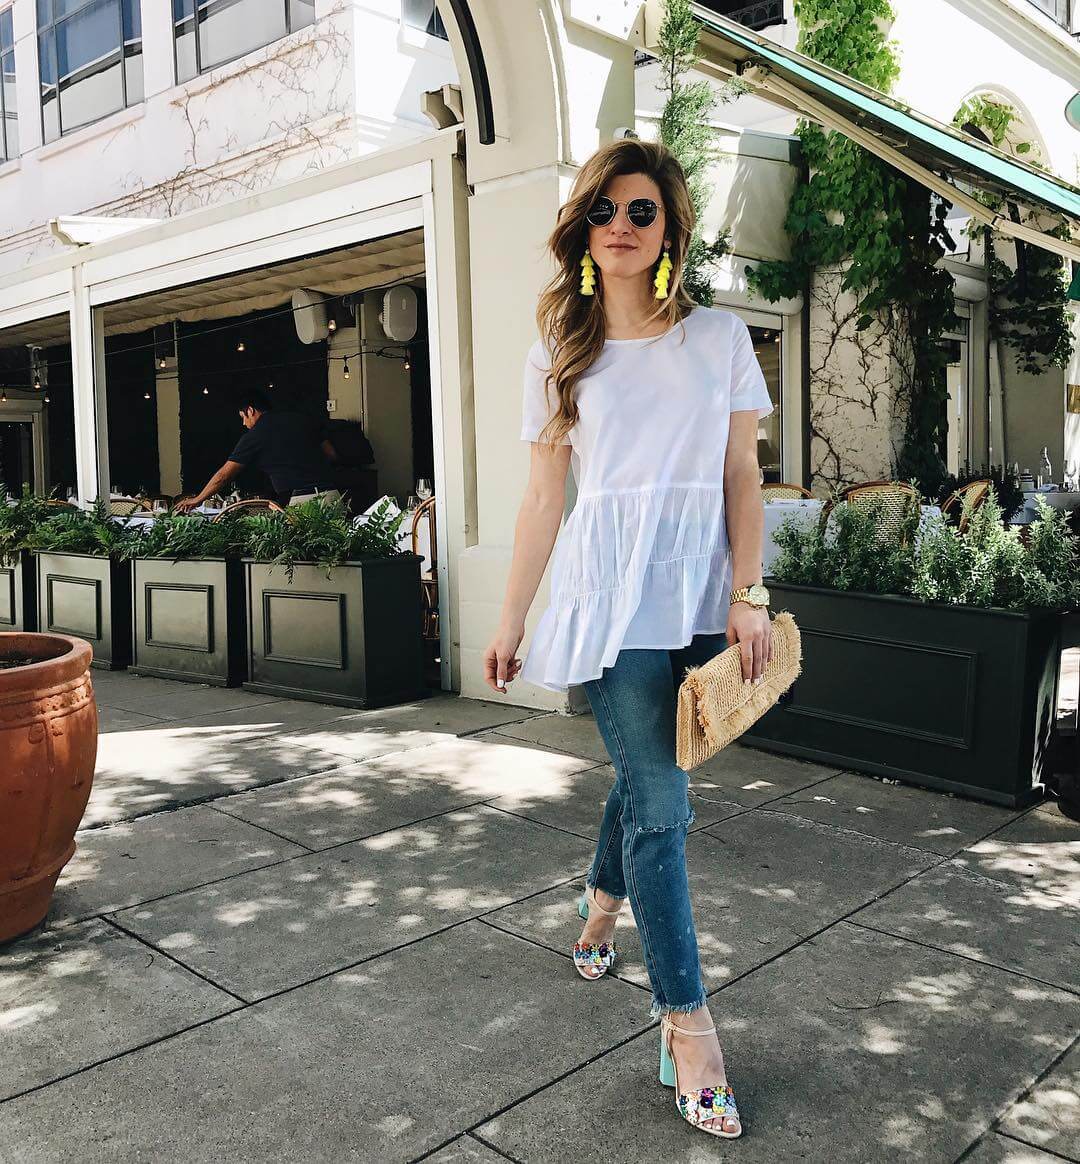 brighton the day wearing white tiered top with jeans and dee keller sandals 